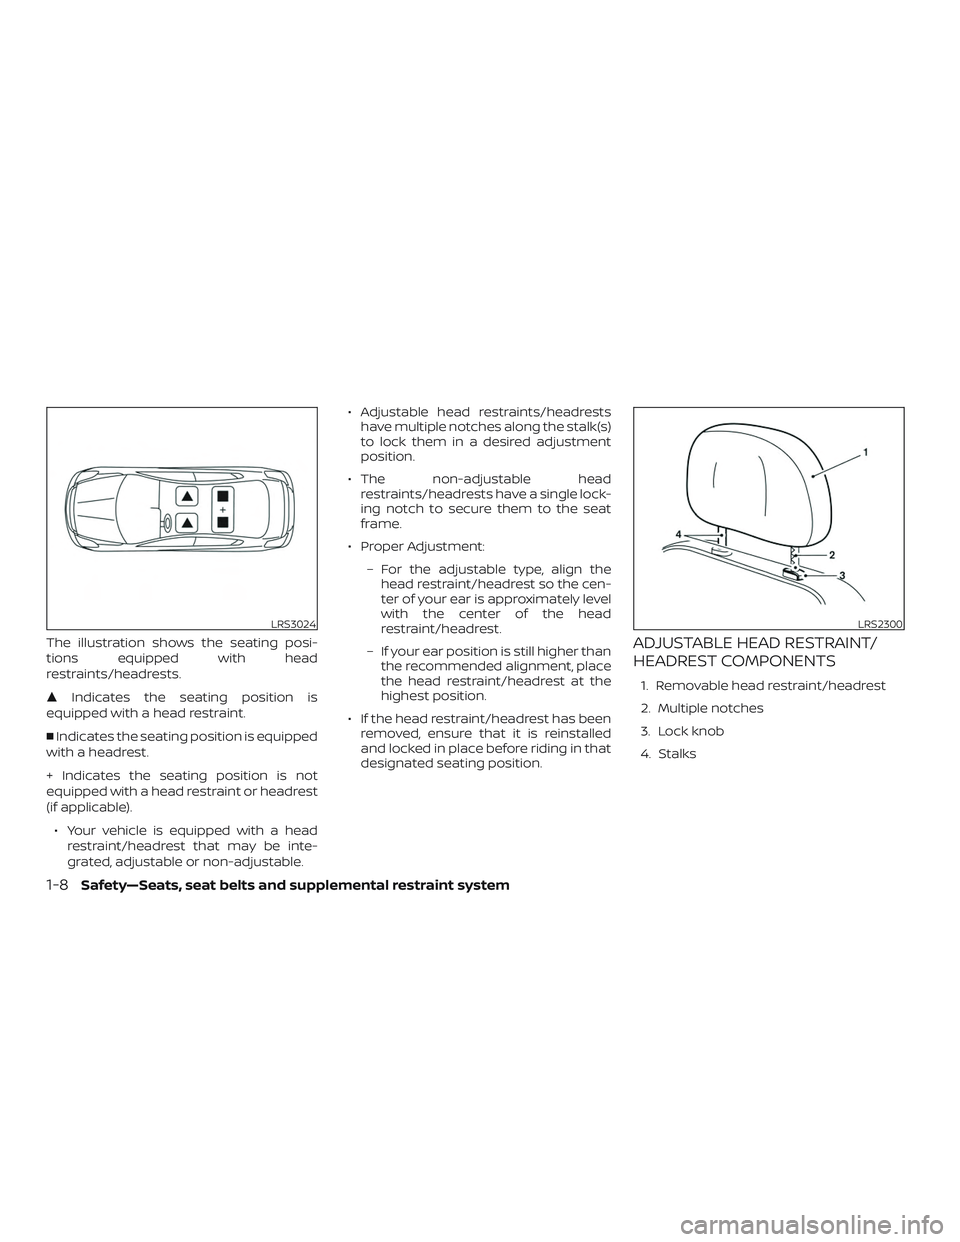 NISSAN SENTRA 2019  Owner´s Manual The illustration shows the seating posi-
tions equipped with head
restraints/headrests.
Indicates the seating position is
equipped with a head restraint.
 Indicates the seating position is equipped
